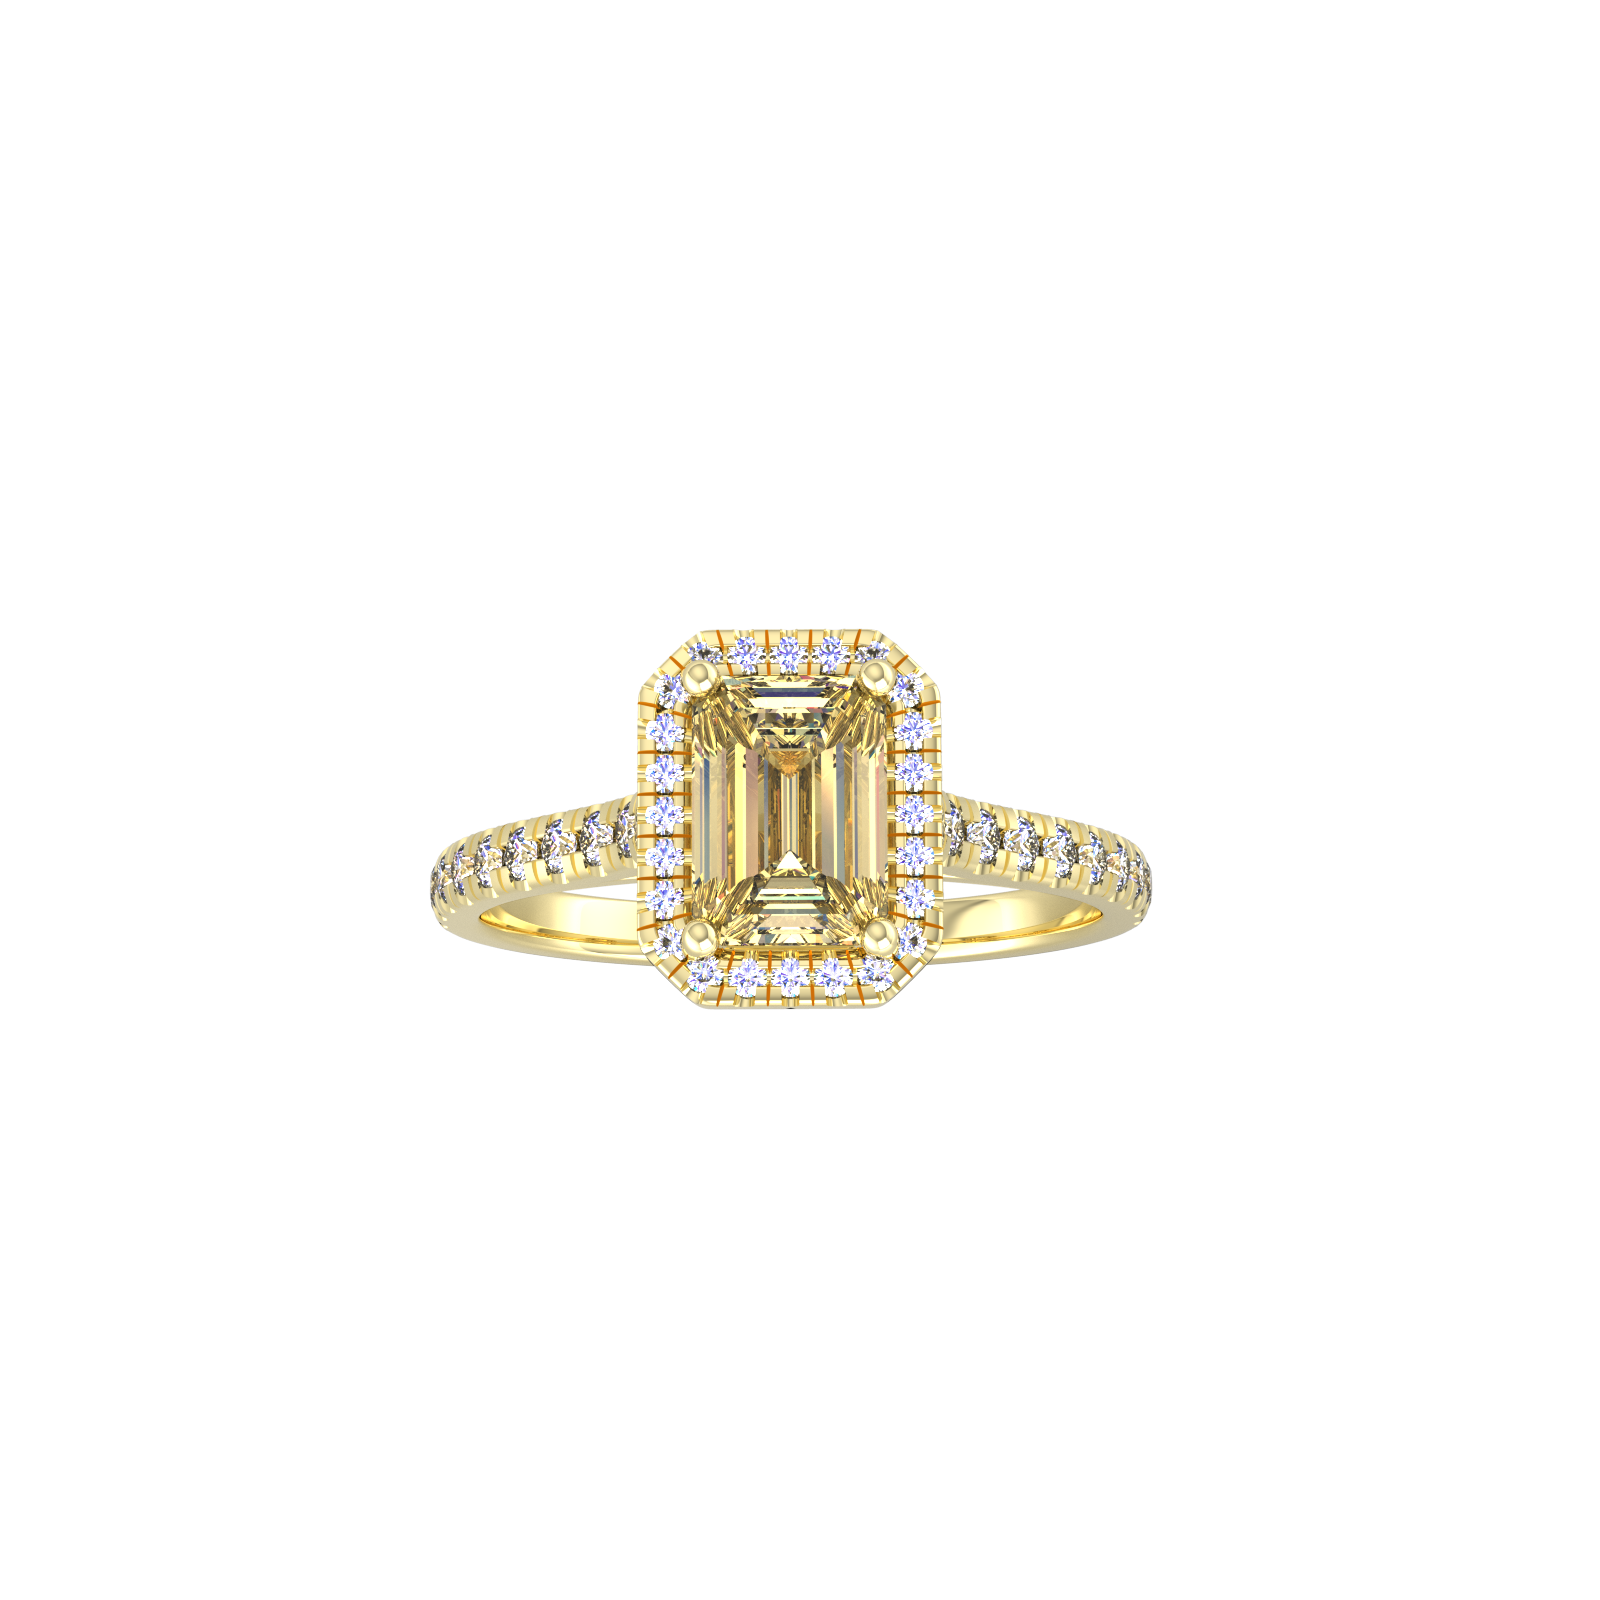 9ct Yellow Gold Citrine & Diamond Halo Ring with Diamond Shoulders - Ring Size I